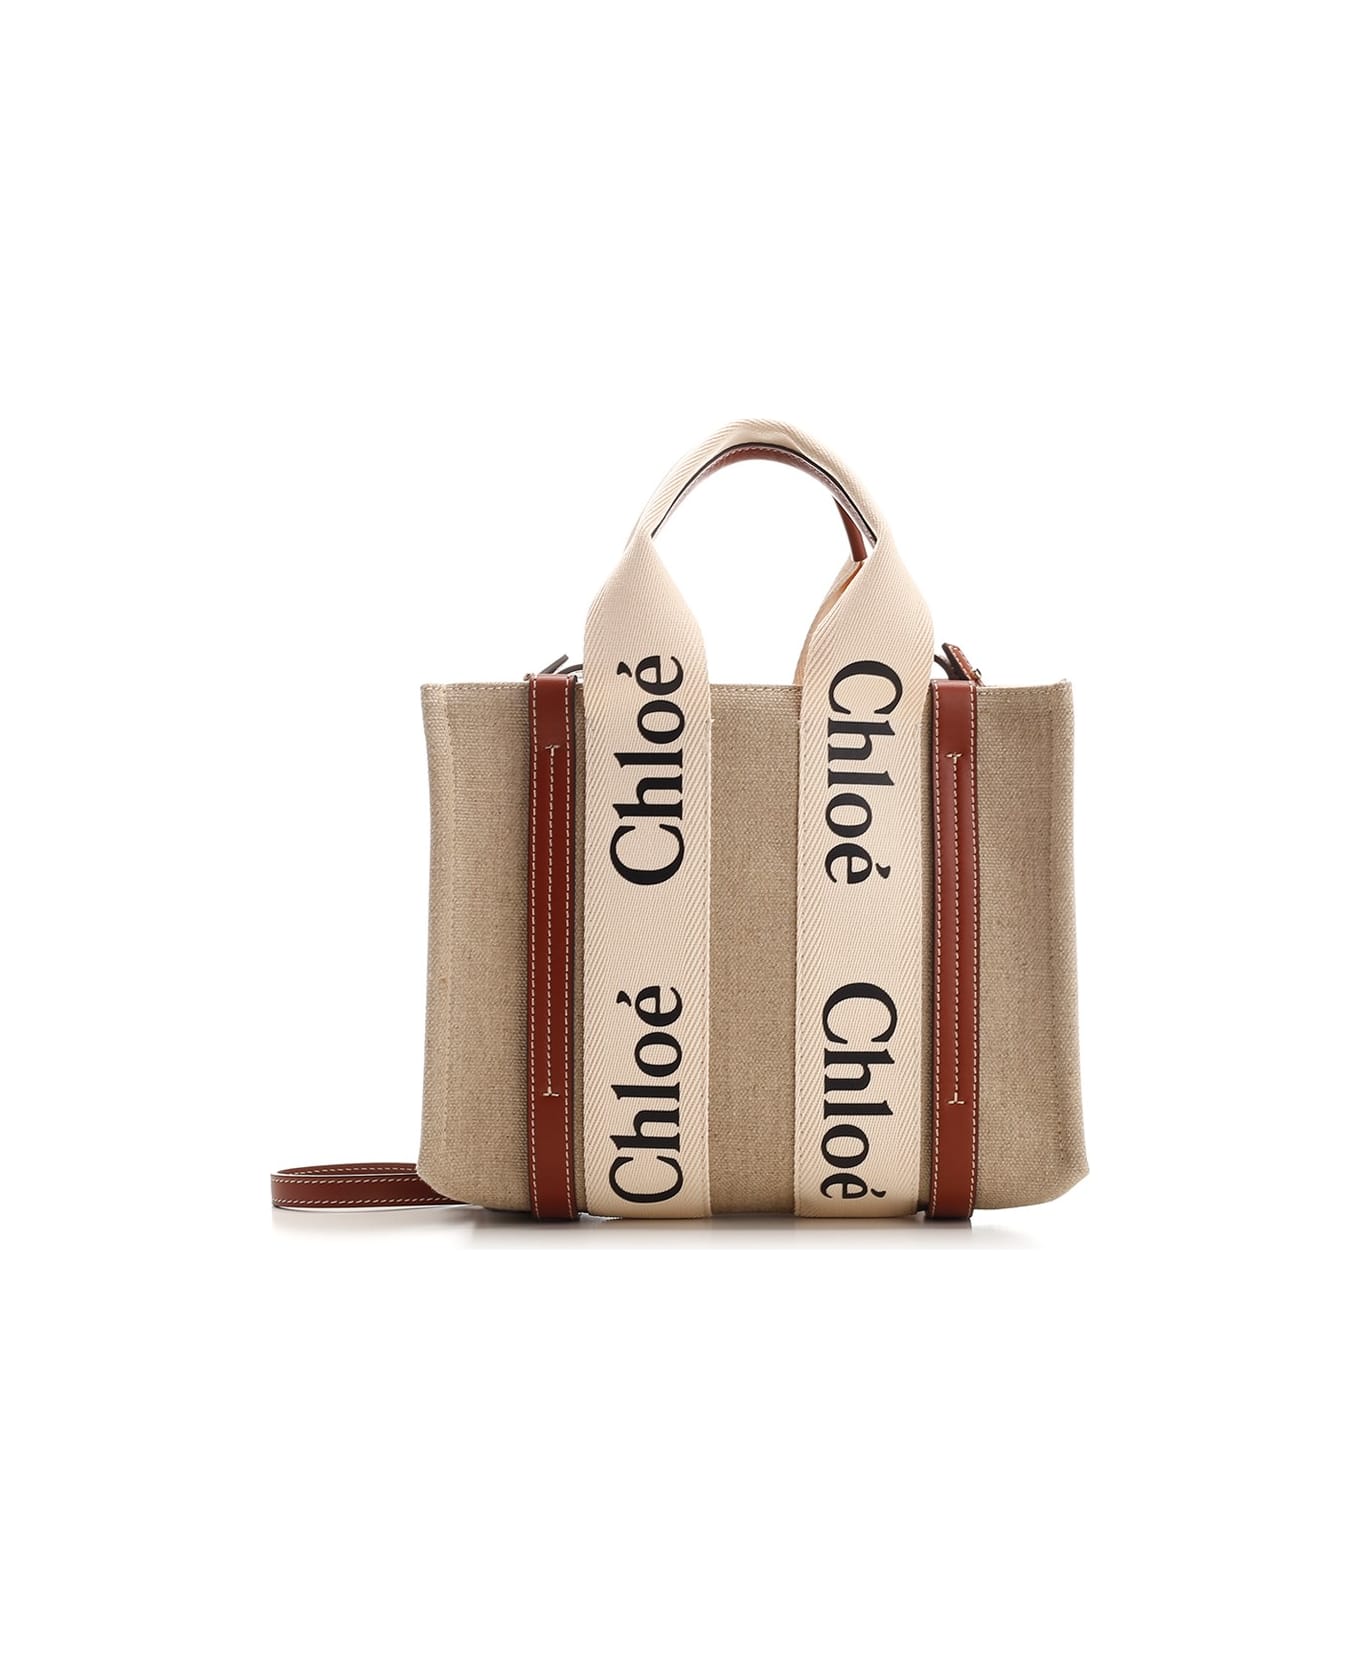 Chloé Small 'woody' Tote Bag - Brown トートバッグ